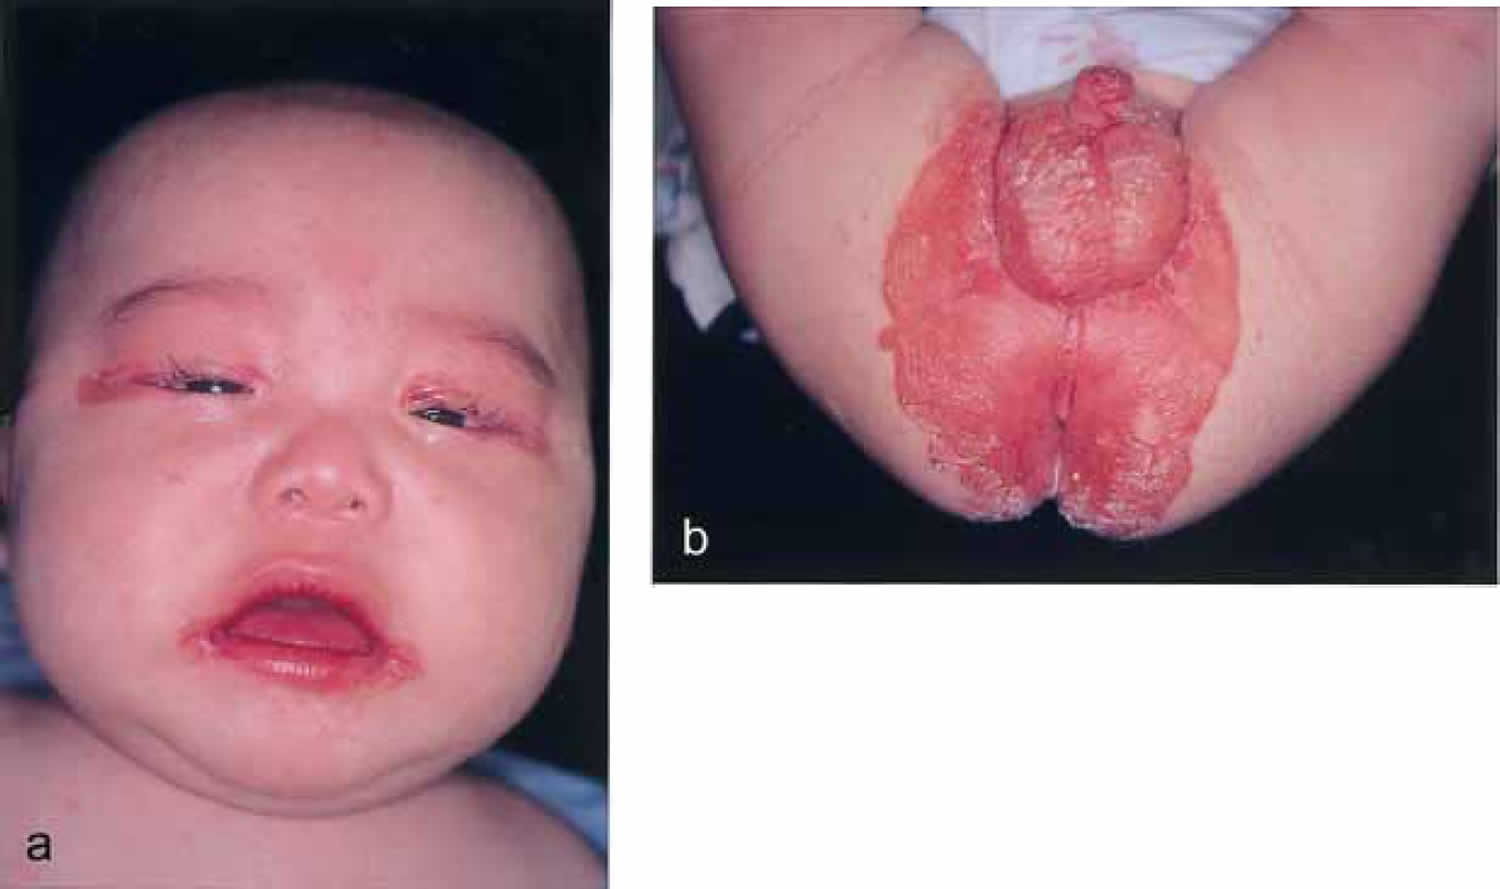 Biotin deficiency in an infant fed with amino acid formula